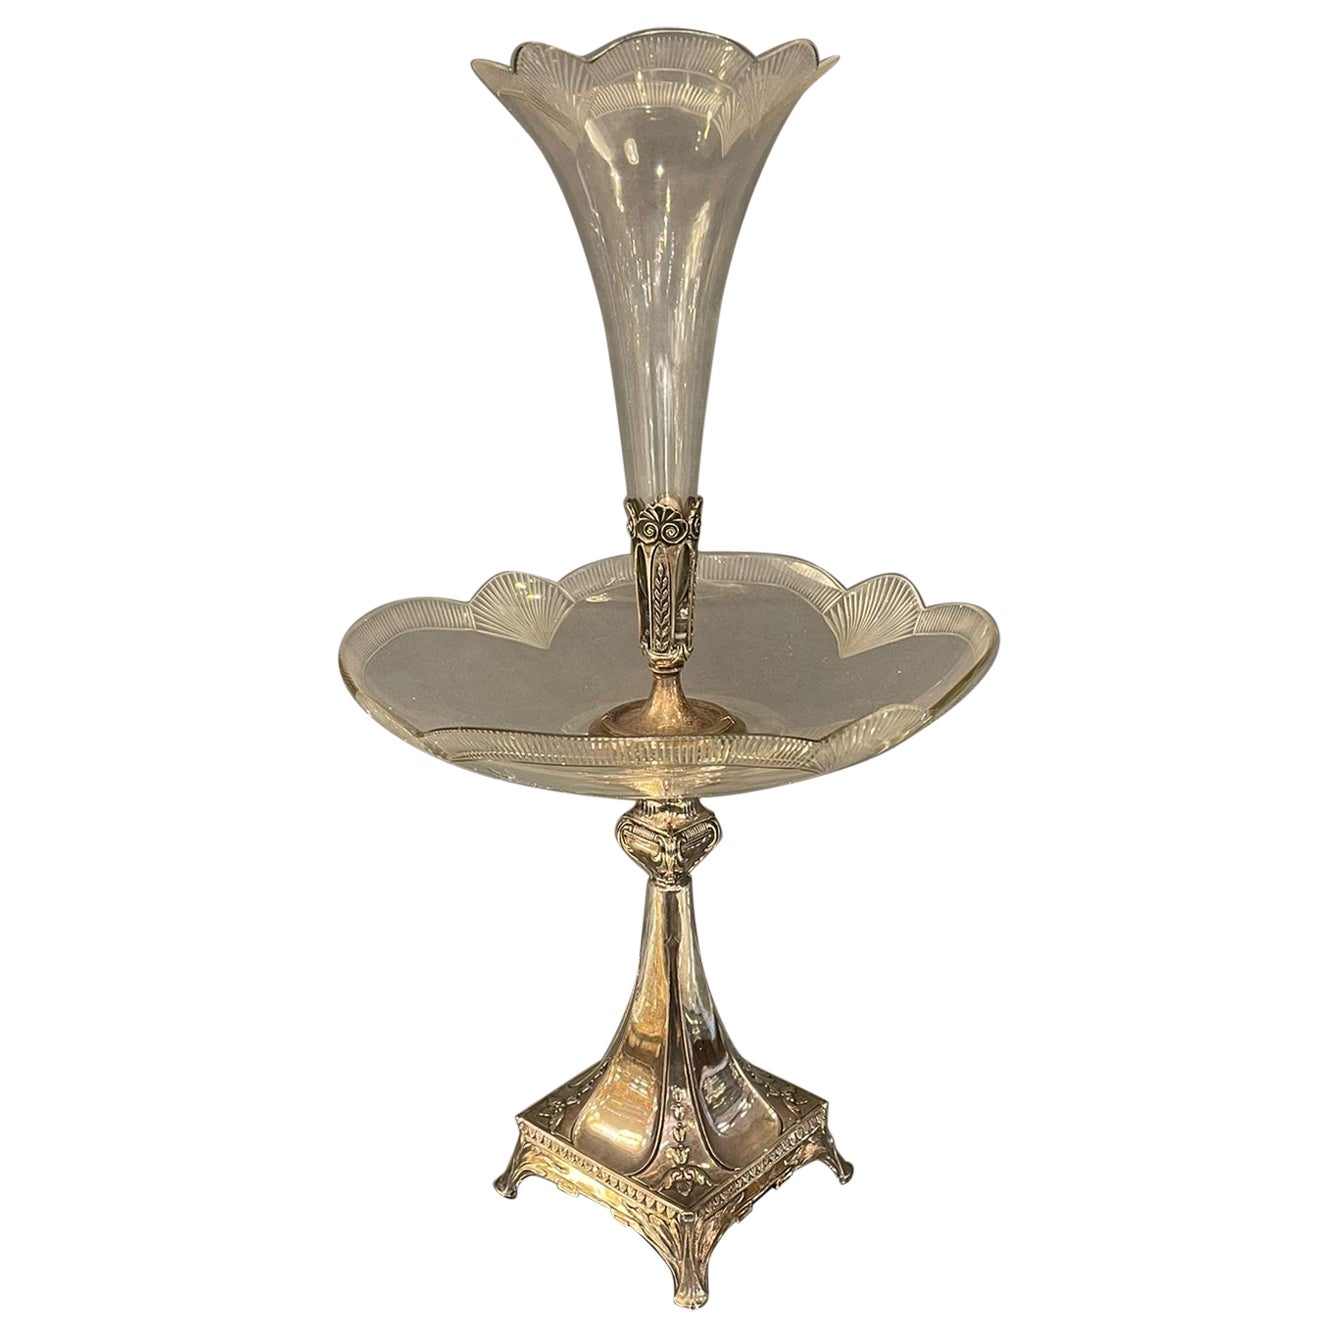 Outstanding Art Nouveau 19th Century Epergne/Centrepiece For Sale